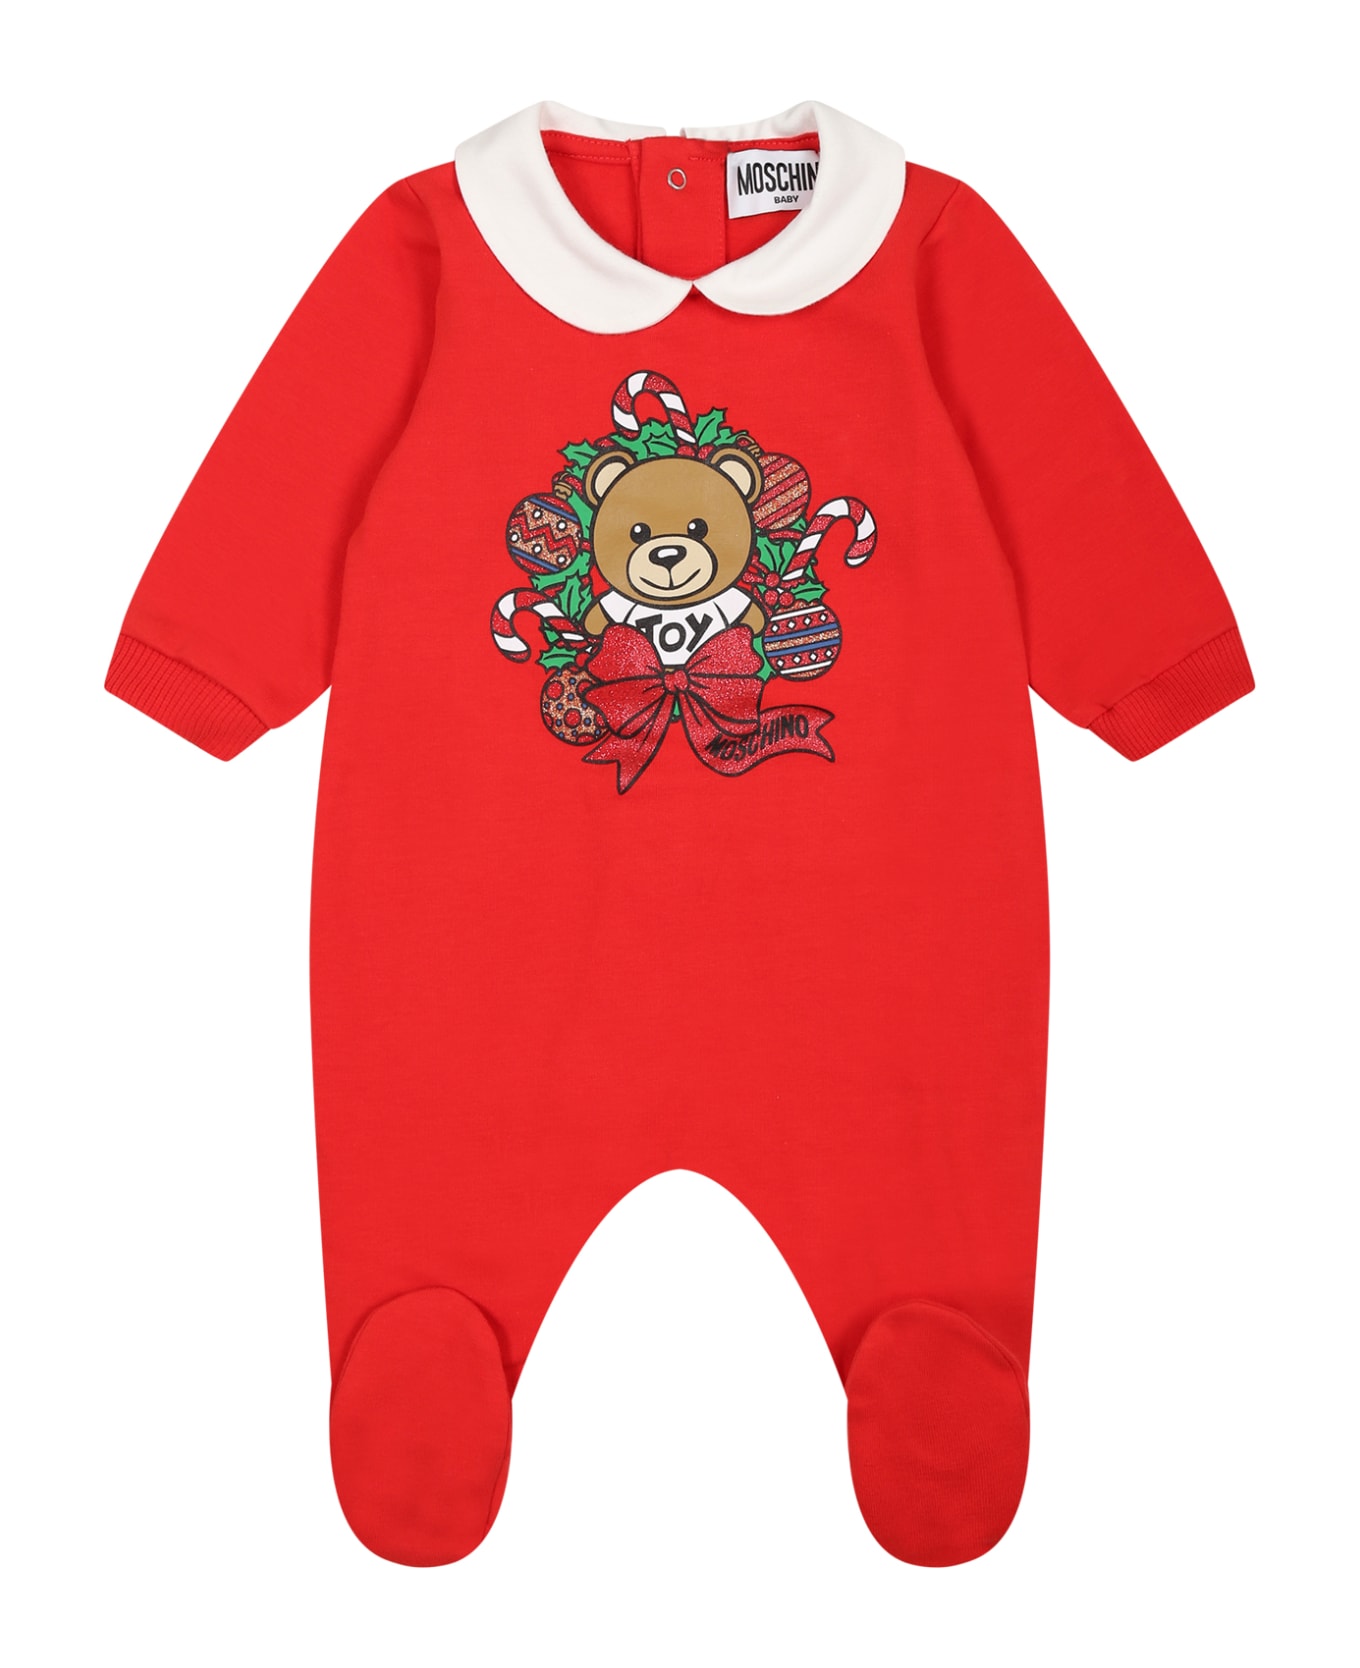 Moschino Red Babygrow For Baby Kids With Teddy Bear - Red